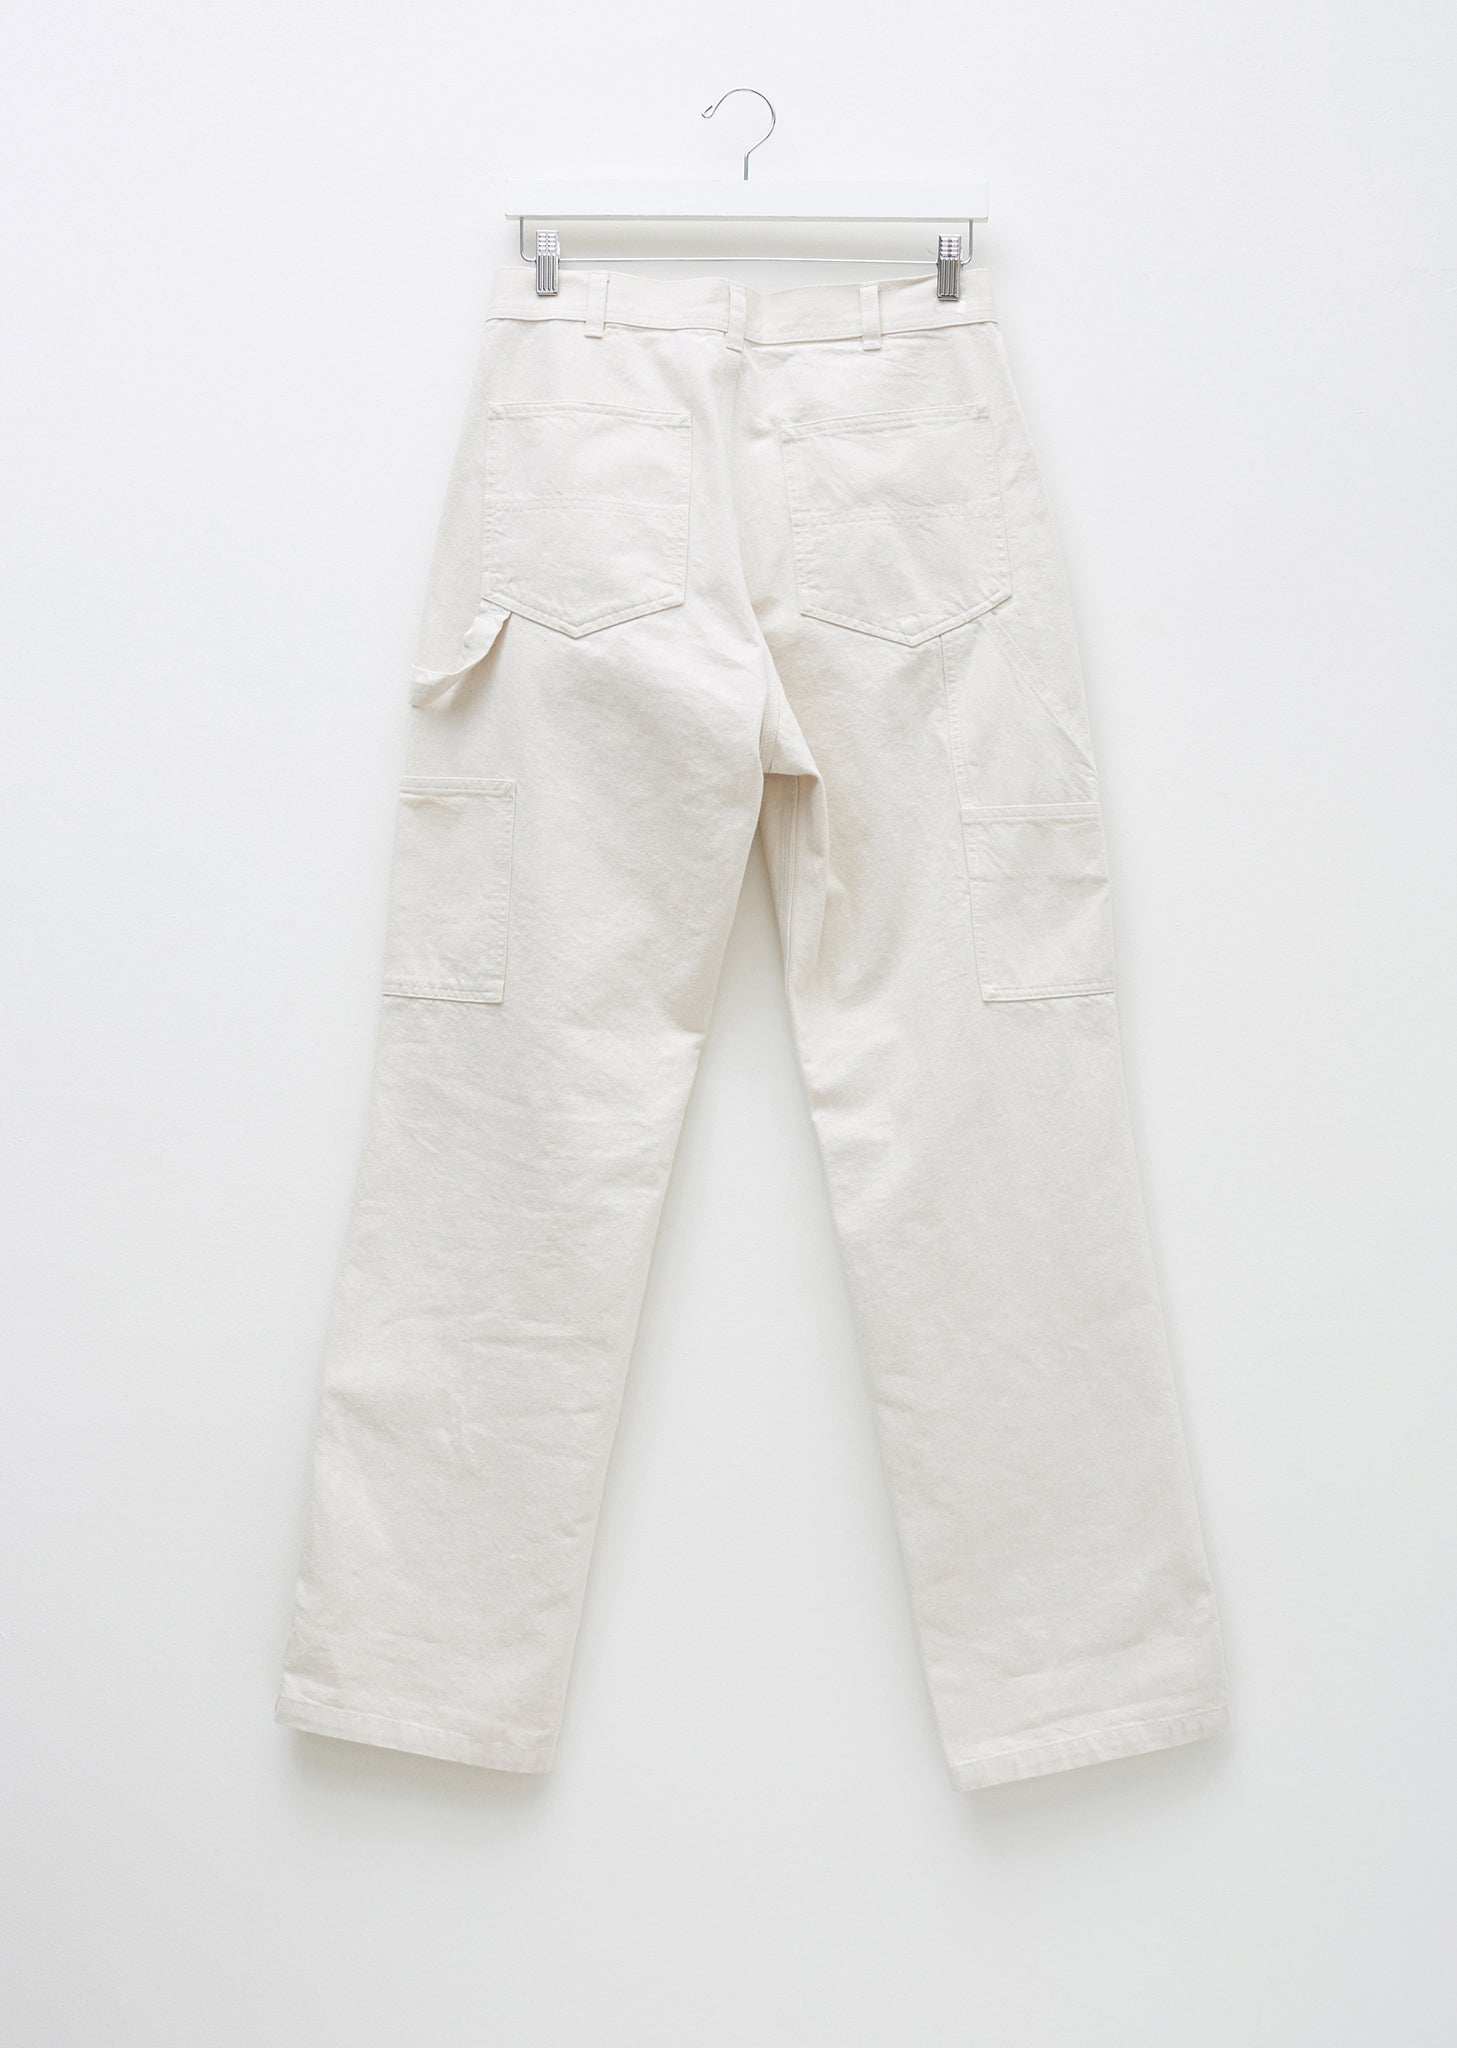 White work trousers Dassy Dynax Painter